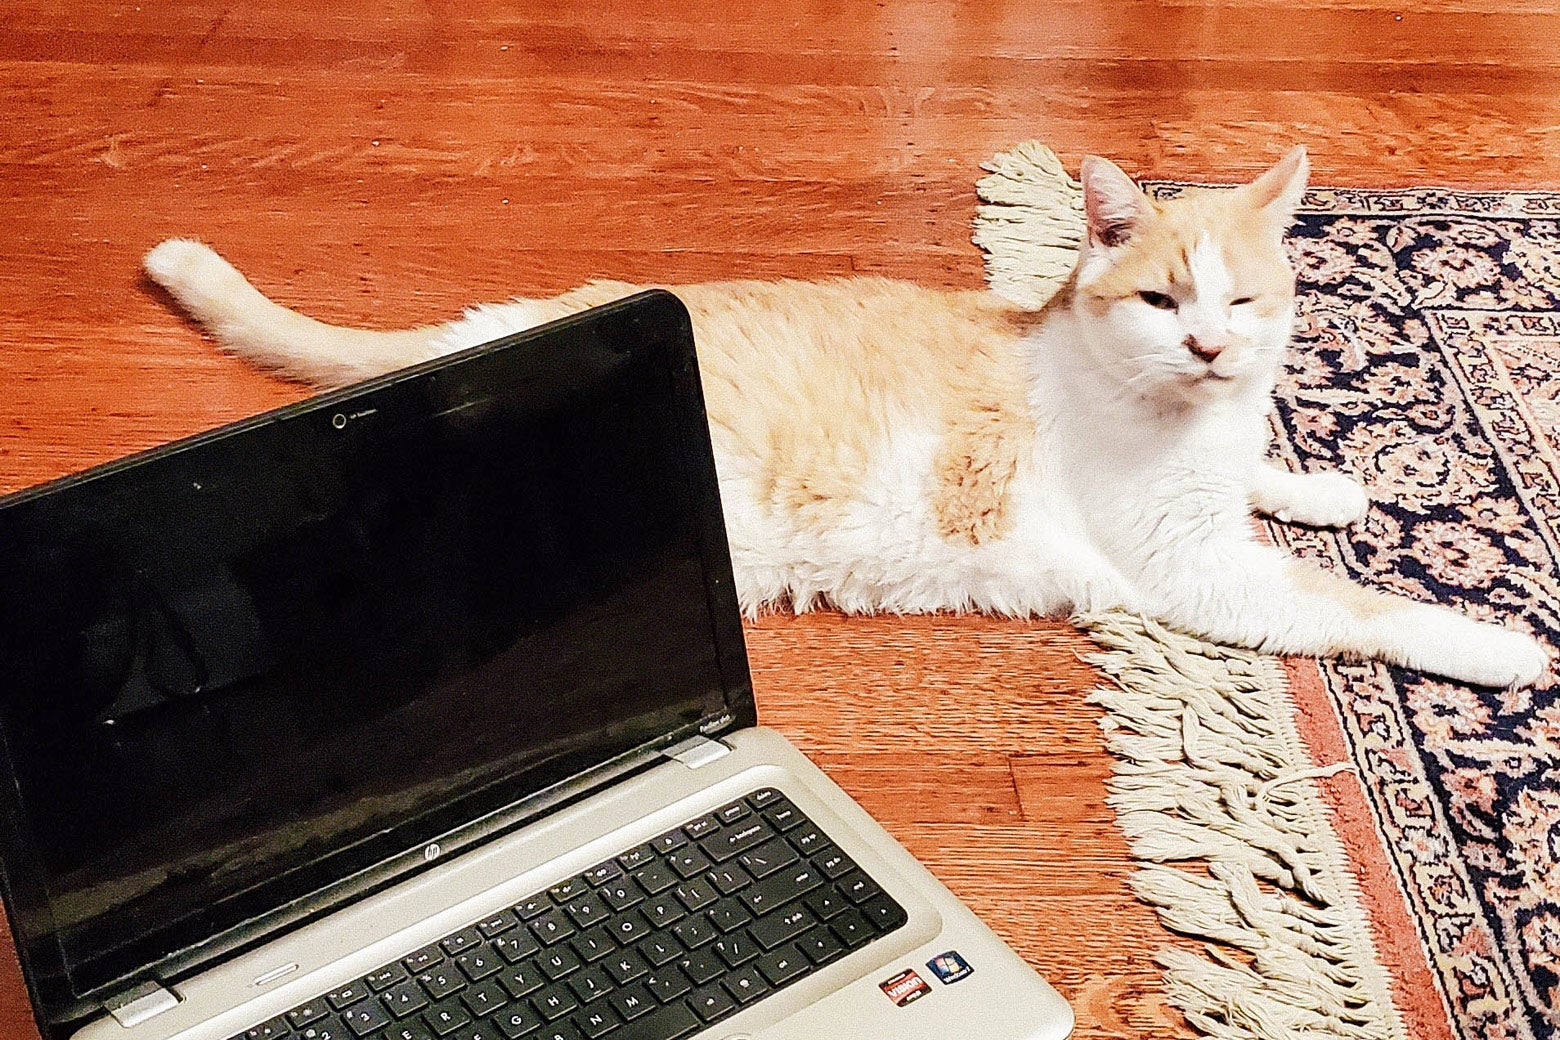 An orange-and-white cat sits on the floor next to an open laptop.